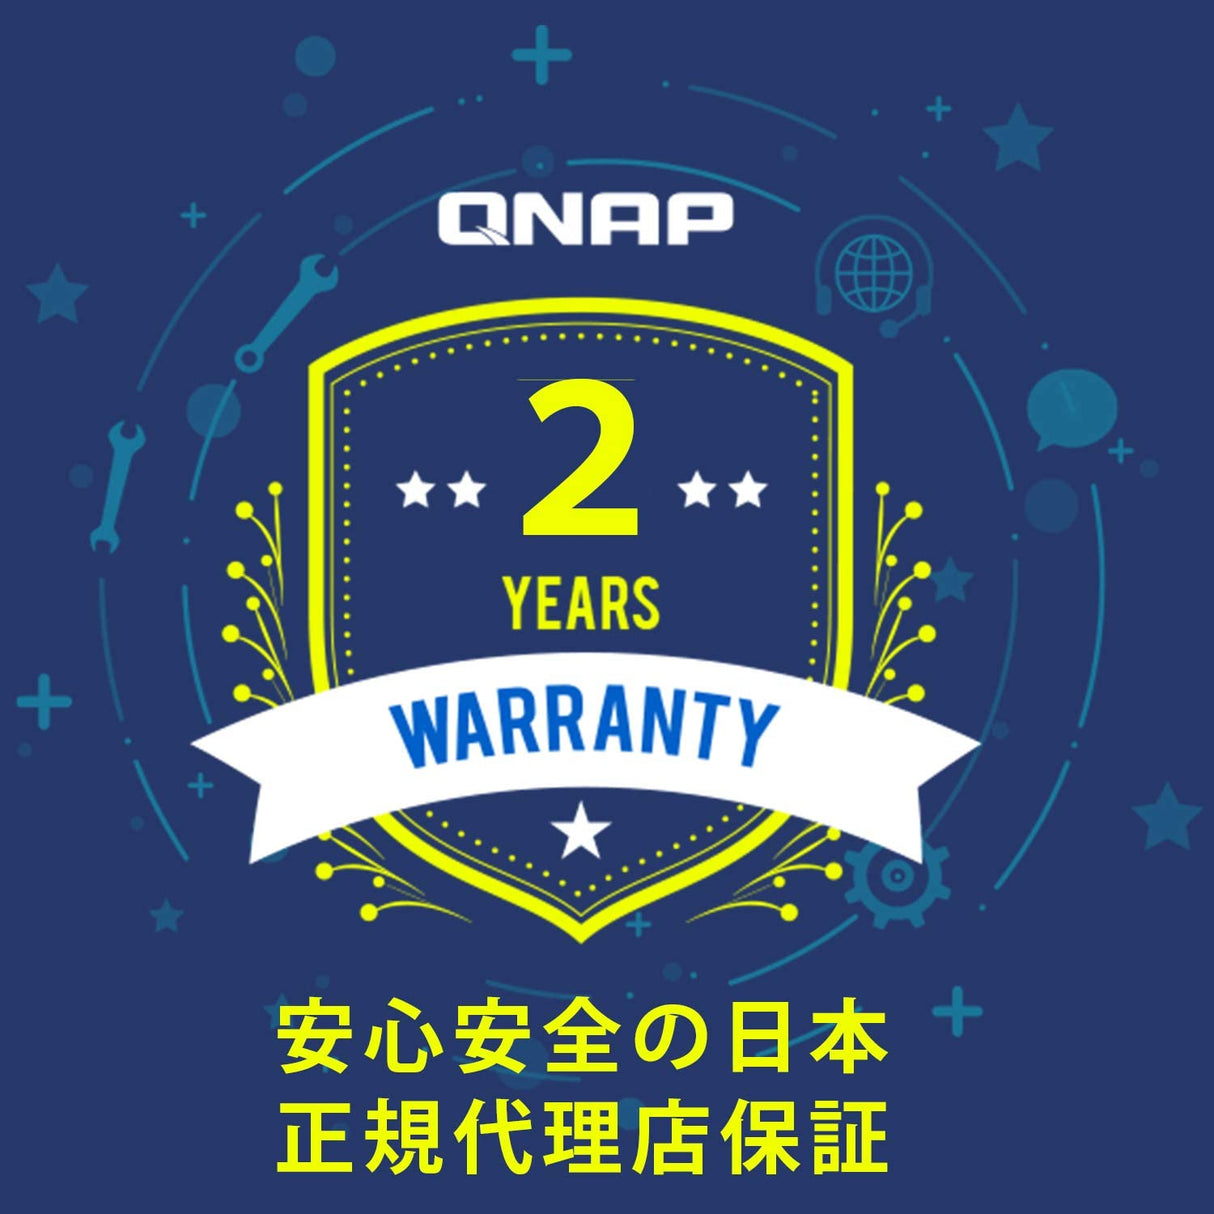 QNAP TS-131K 1 Bay Home NAS with One 1GbE Port 1-bay NAS